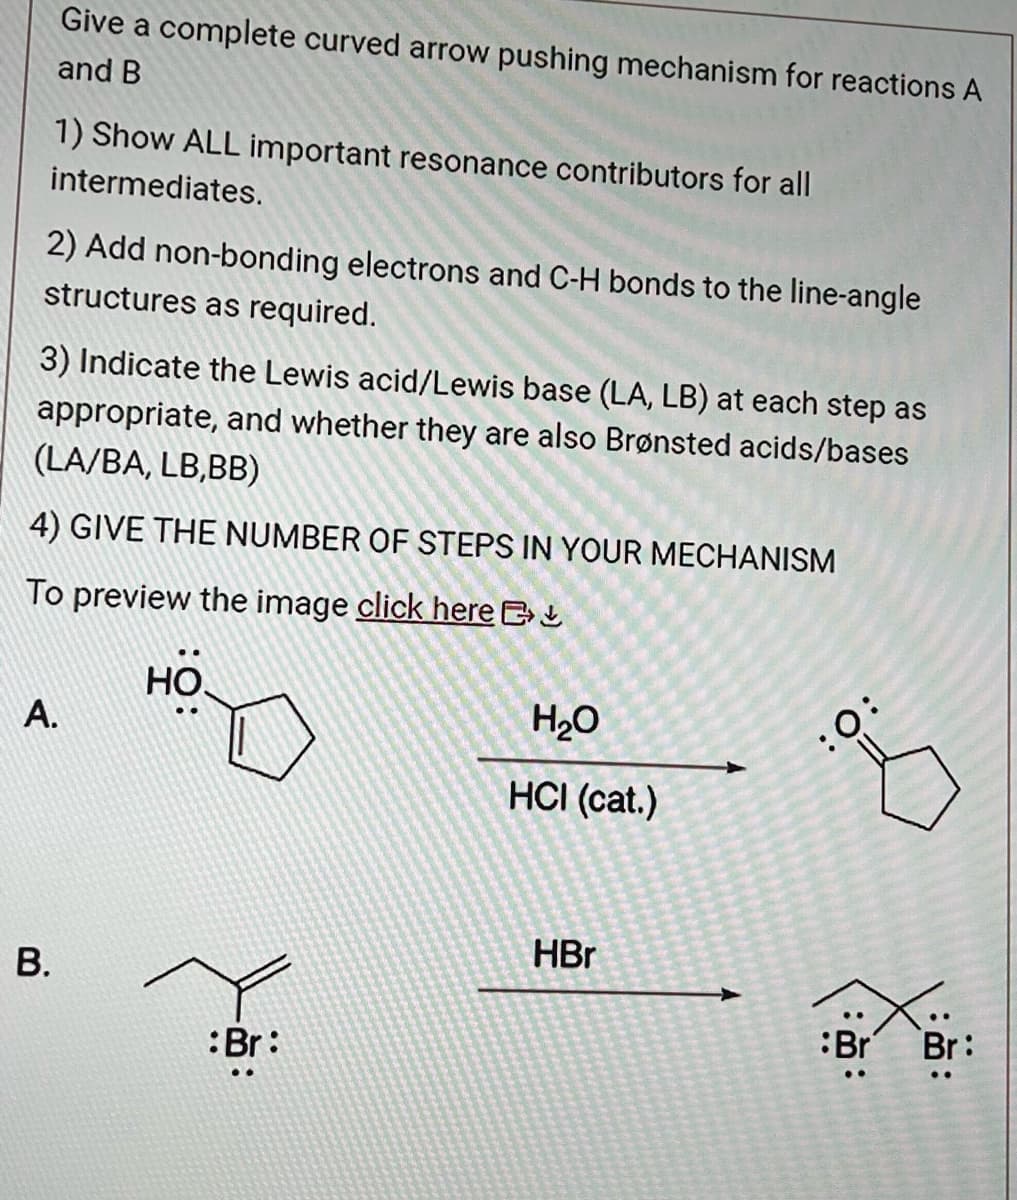 Give a complete curved arrow pushing mechanism for reactions A
and B
1) Show ALL important resonance contributors for all
intermediates.
2) Add non-bonding electrons and C-H bonds to the line-angle
structures as required.
3) Indicate the Lewis acid/Lewis base (LA, LB) at each step as
appropriate, and whether they are also Brønsted acids/bases
(LA/BA, LB,BB)
4) GIVE THE NUMBER OF STEPS IN YOUR MECHANISM
To preview the image click here
A.
B.
9:
:Br:
H₂O
HCI (cat.)
HBr
:O:
Br
:
Br: